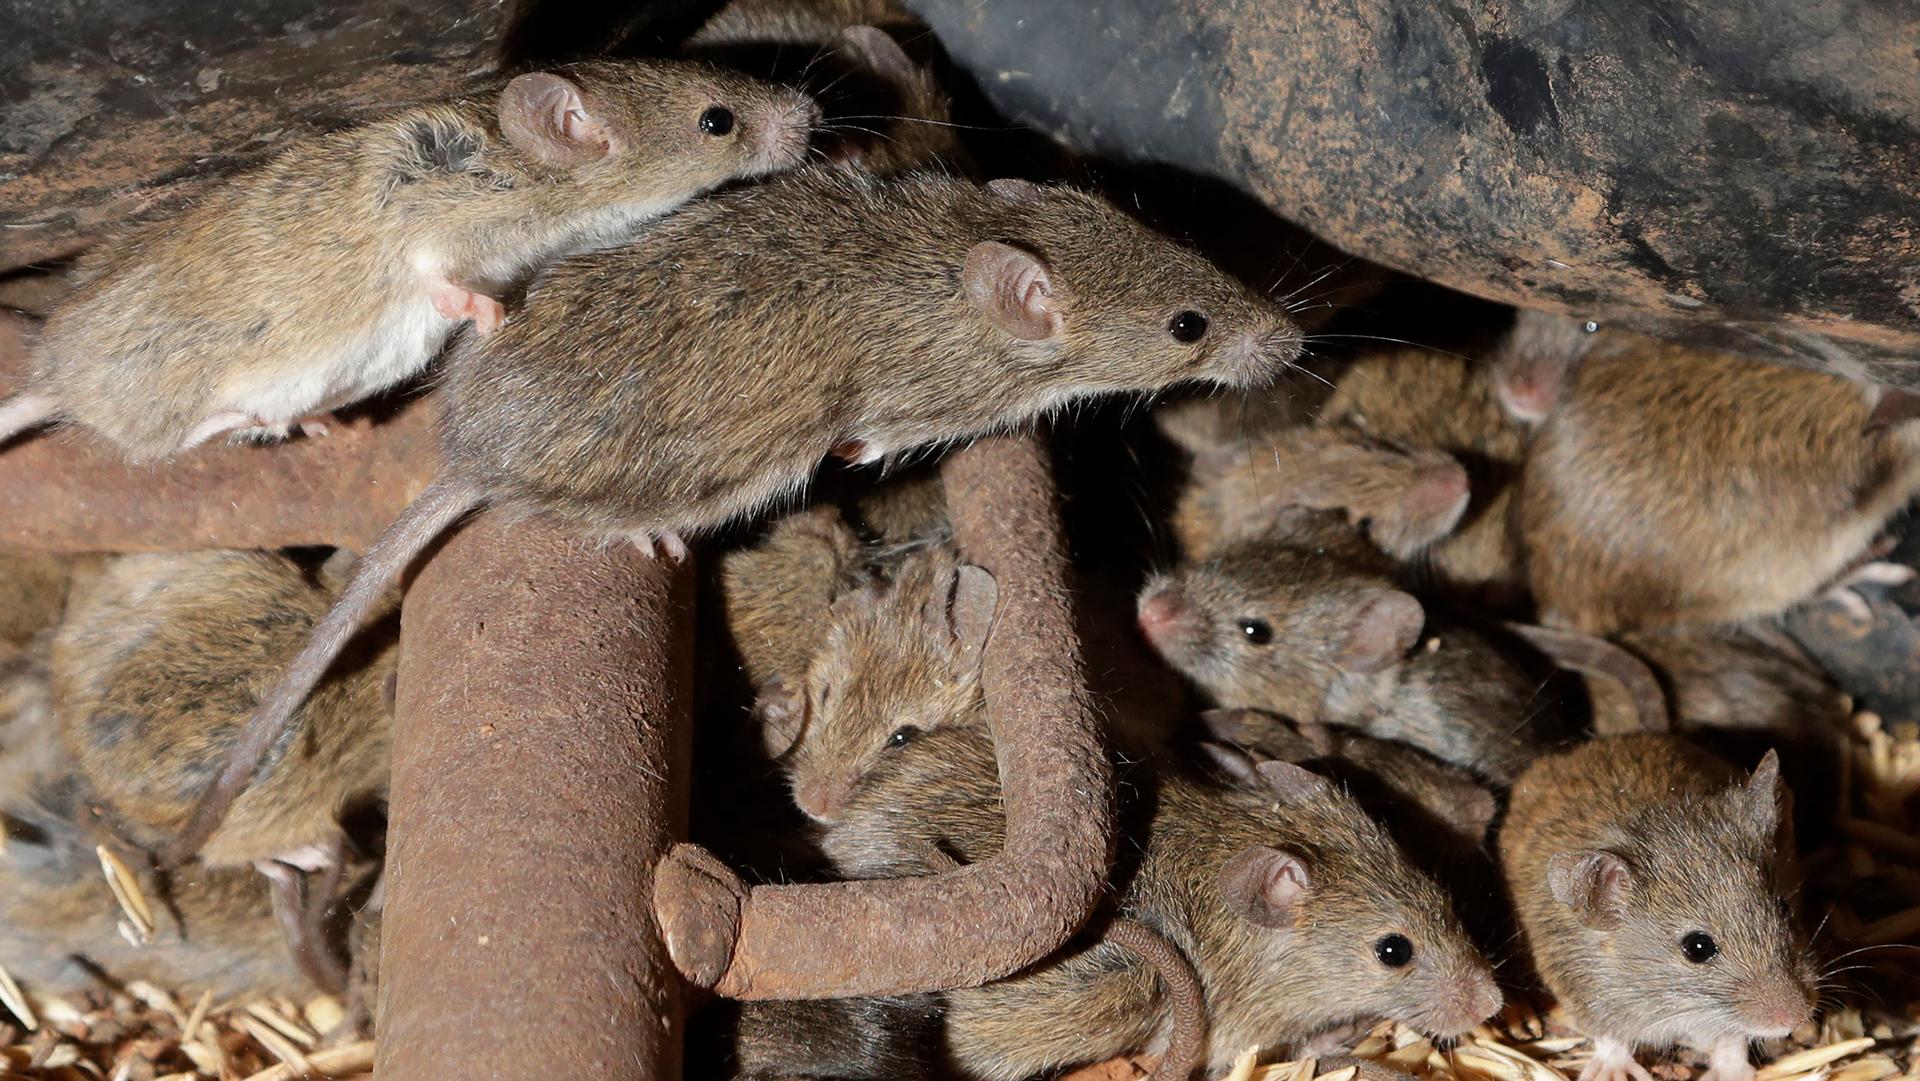 Several brown-colored mice are shown overrunning an Australian farm.